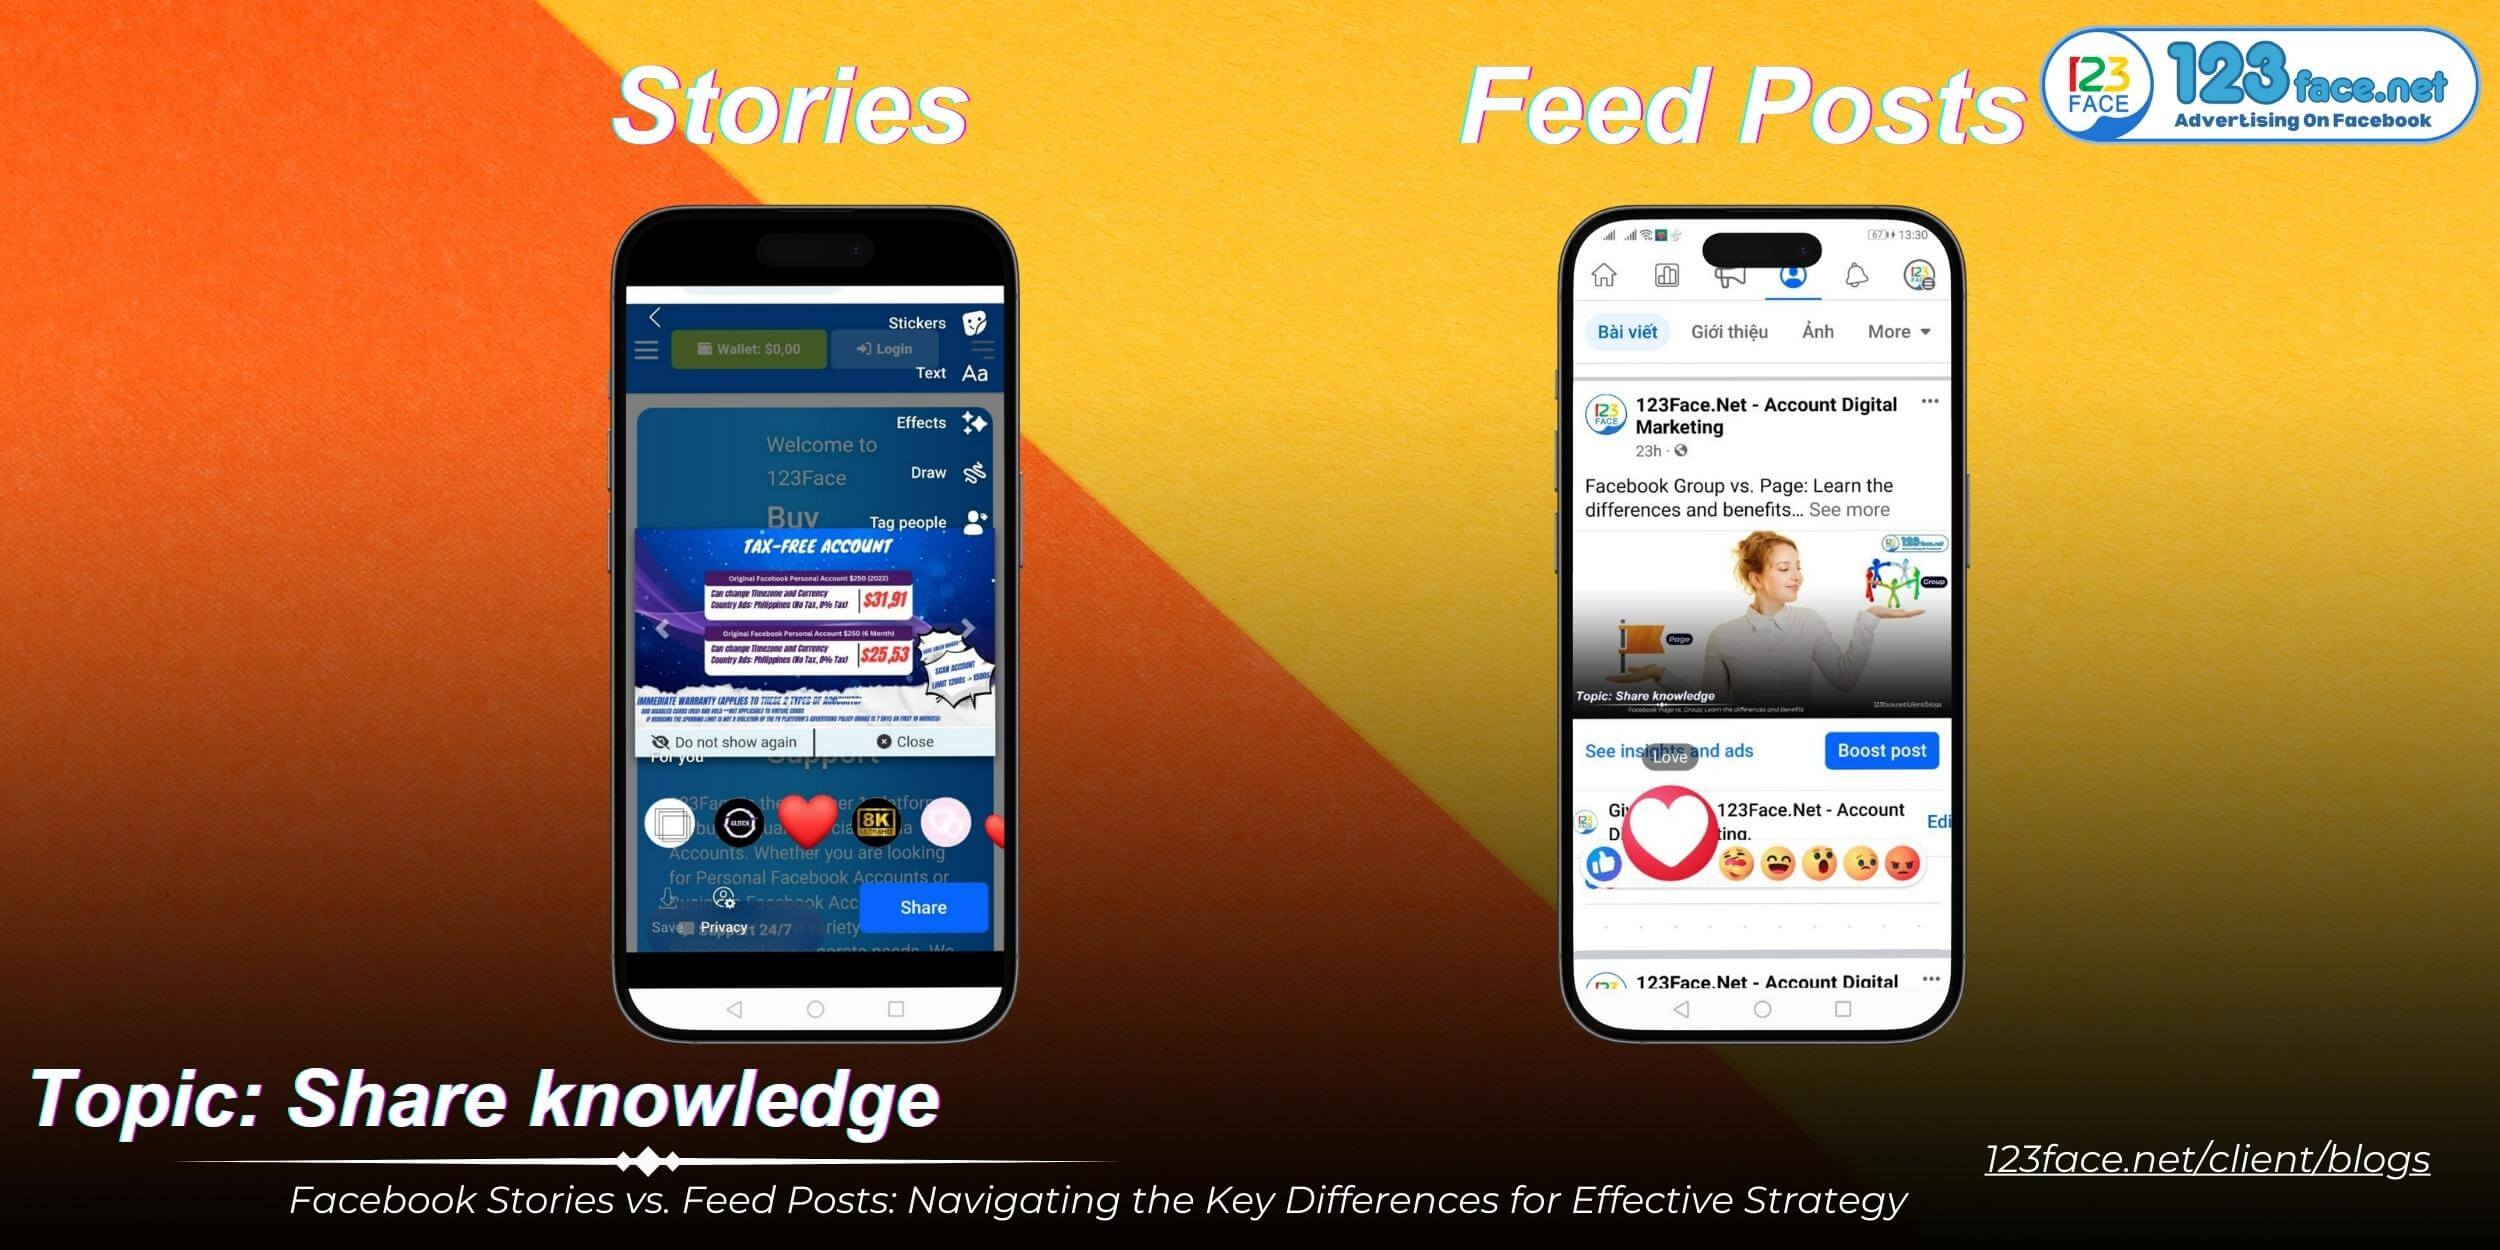 Facebook Stories vs. Feed Posts: Navigating the Key Differences for Effective Strategy